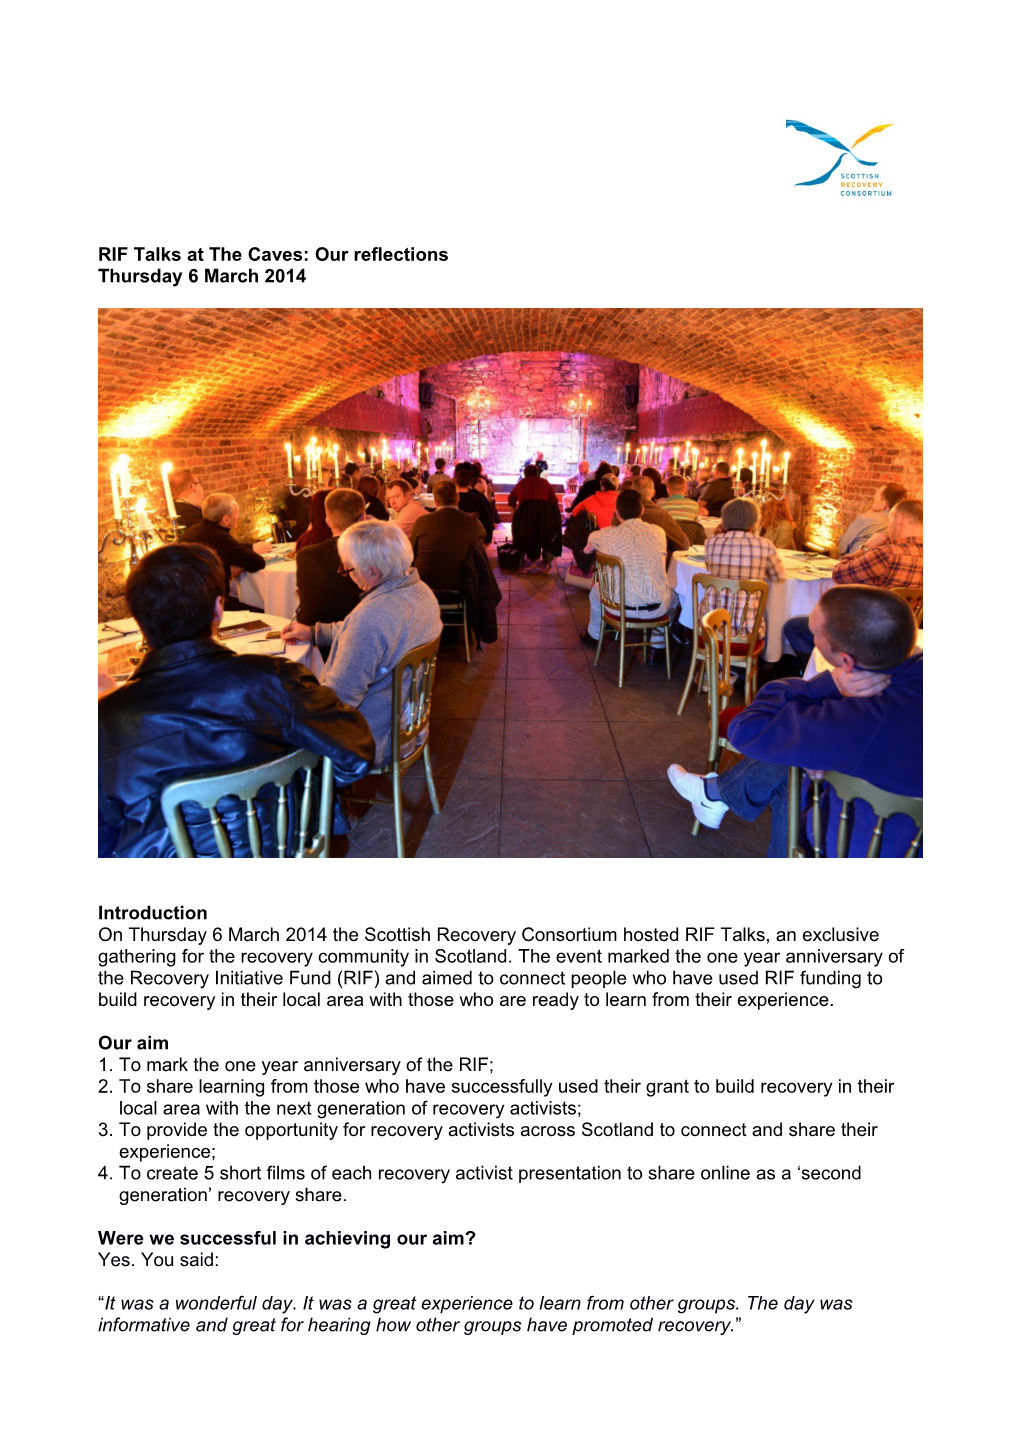 RIF Talks at the Caves:Our Reflections Thursday 6 March 2014